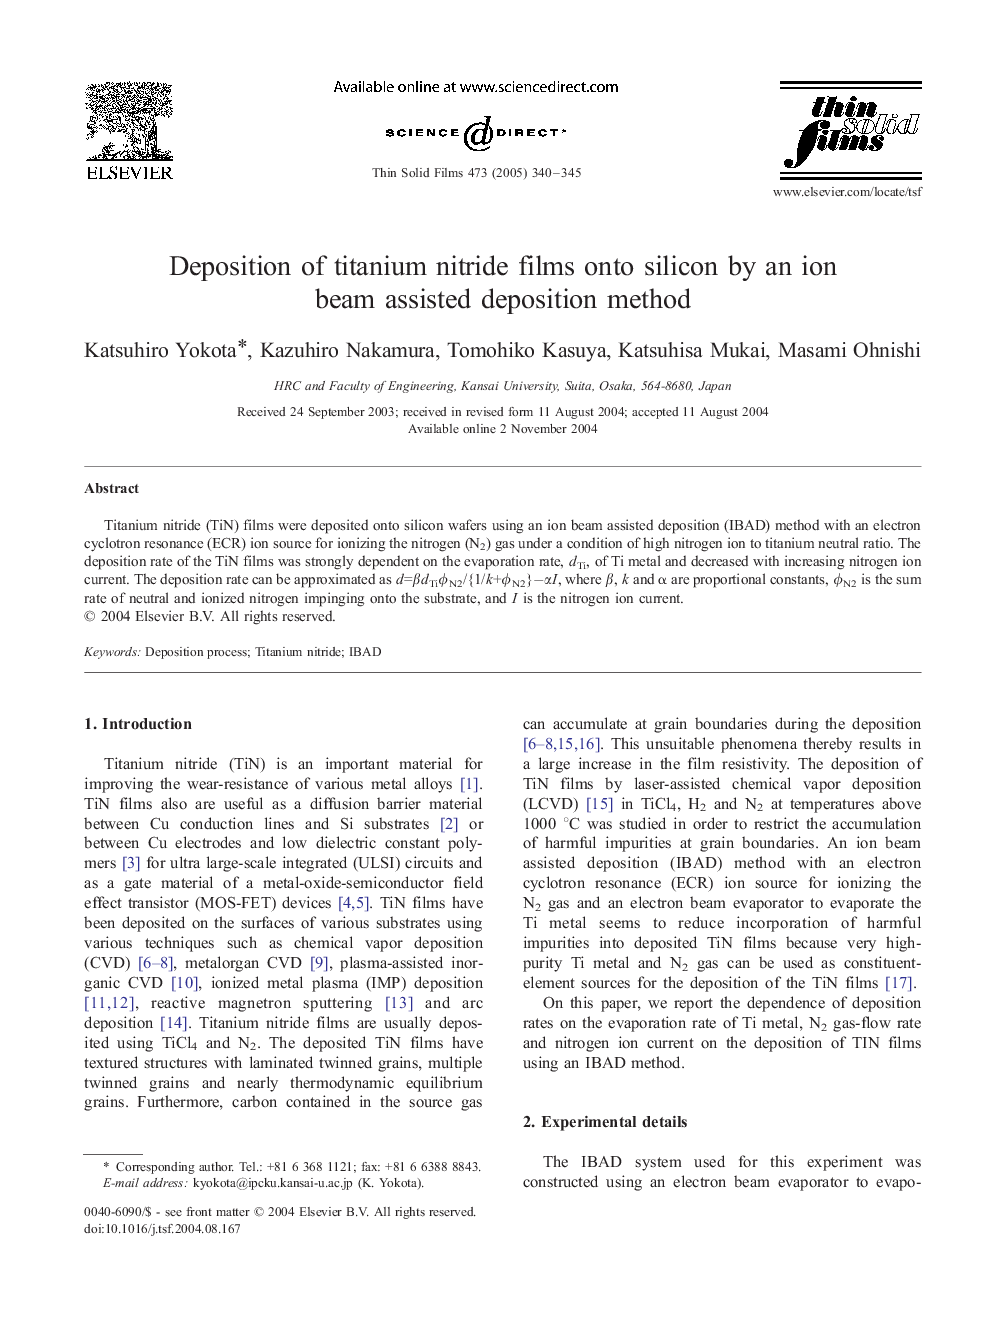 Deposition of titanium nitride films onto silicon by an ion beam assisted deposition method